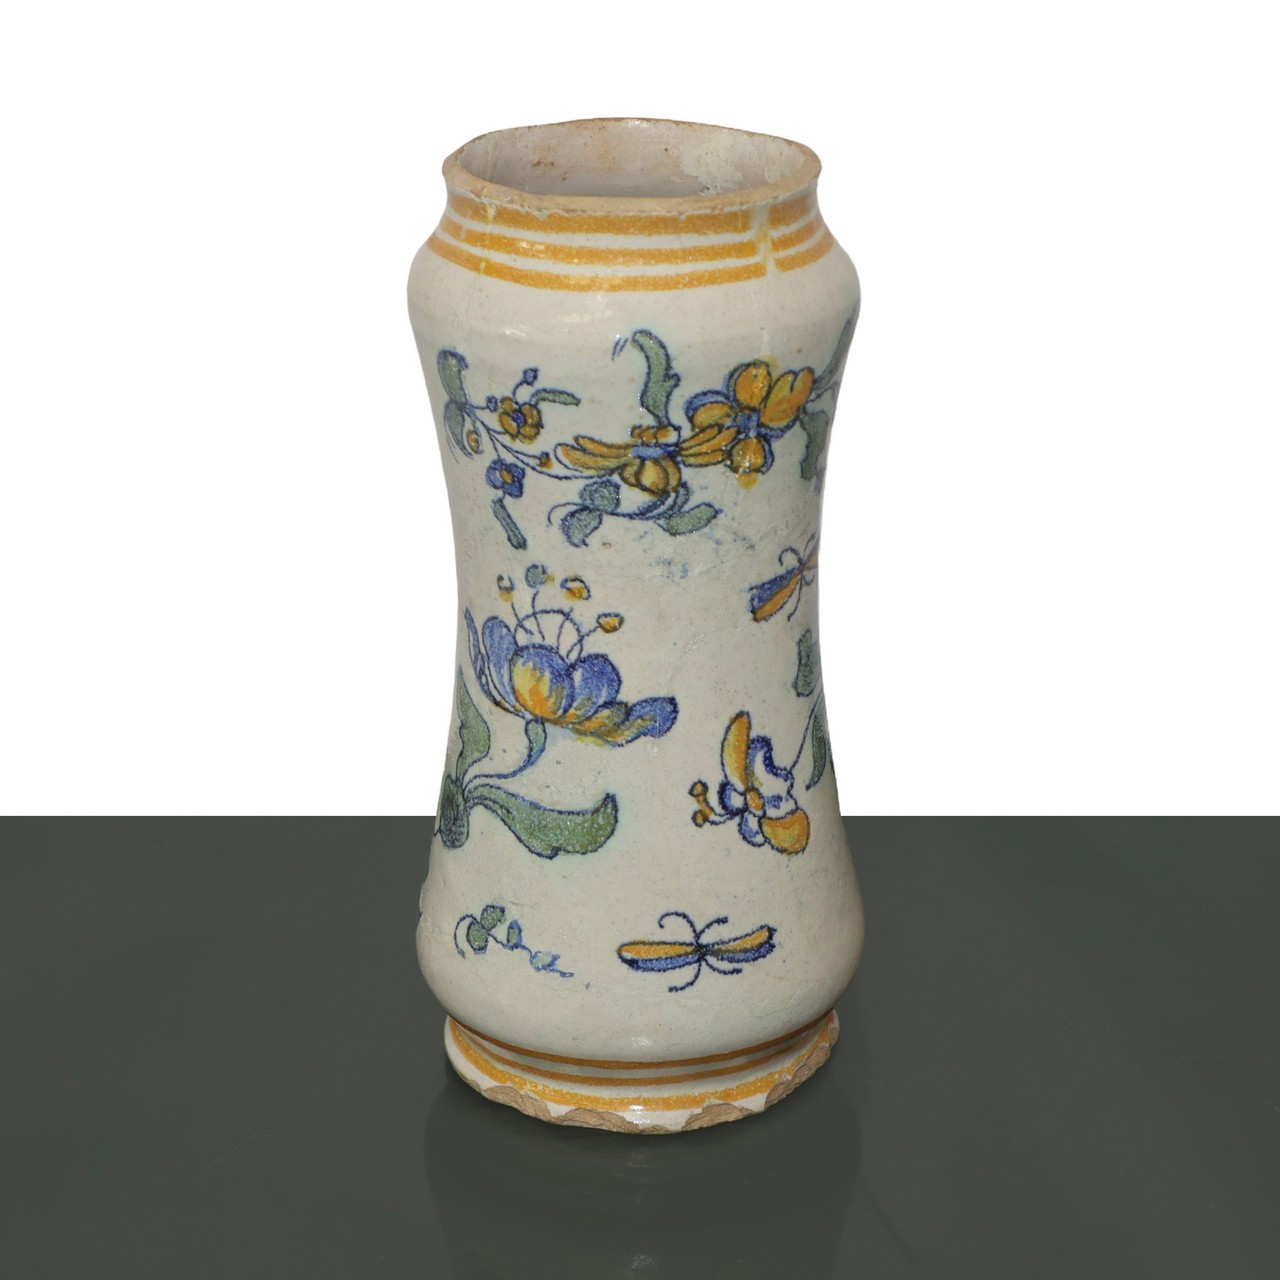 Neapolitan majolica albarello painted with flowers and butterflies, 18th century - Image 2 of 3